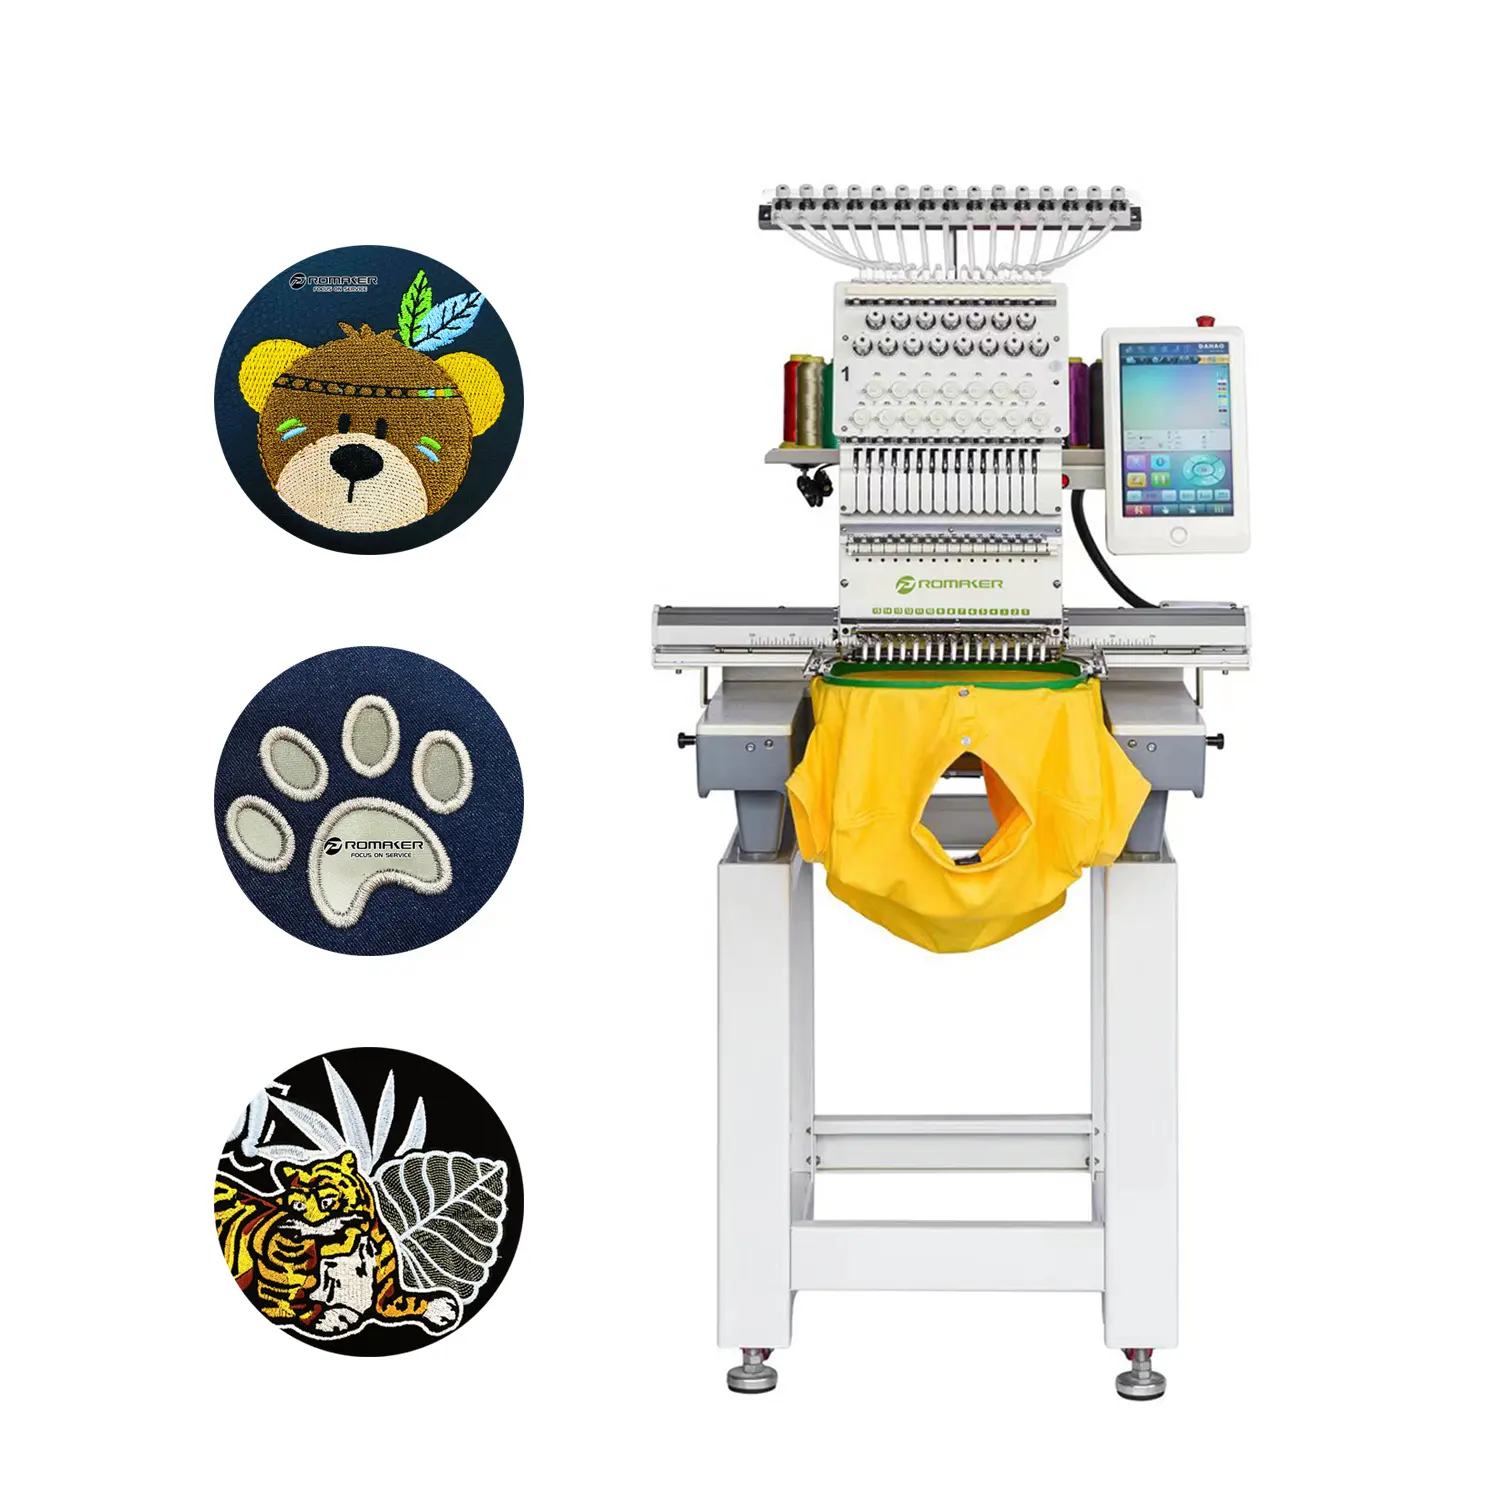 Promaker Seven days to the door computerized single head t shirt cap embroidery machine price for USA warehouse